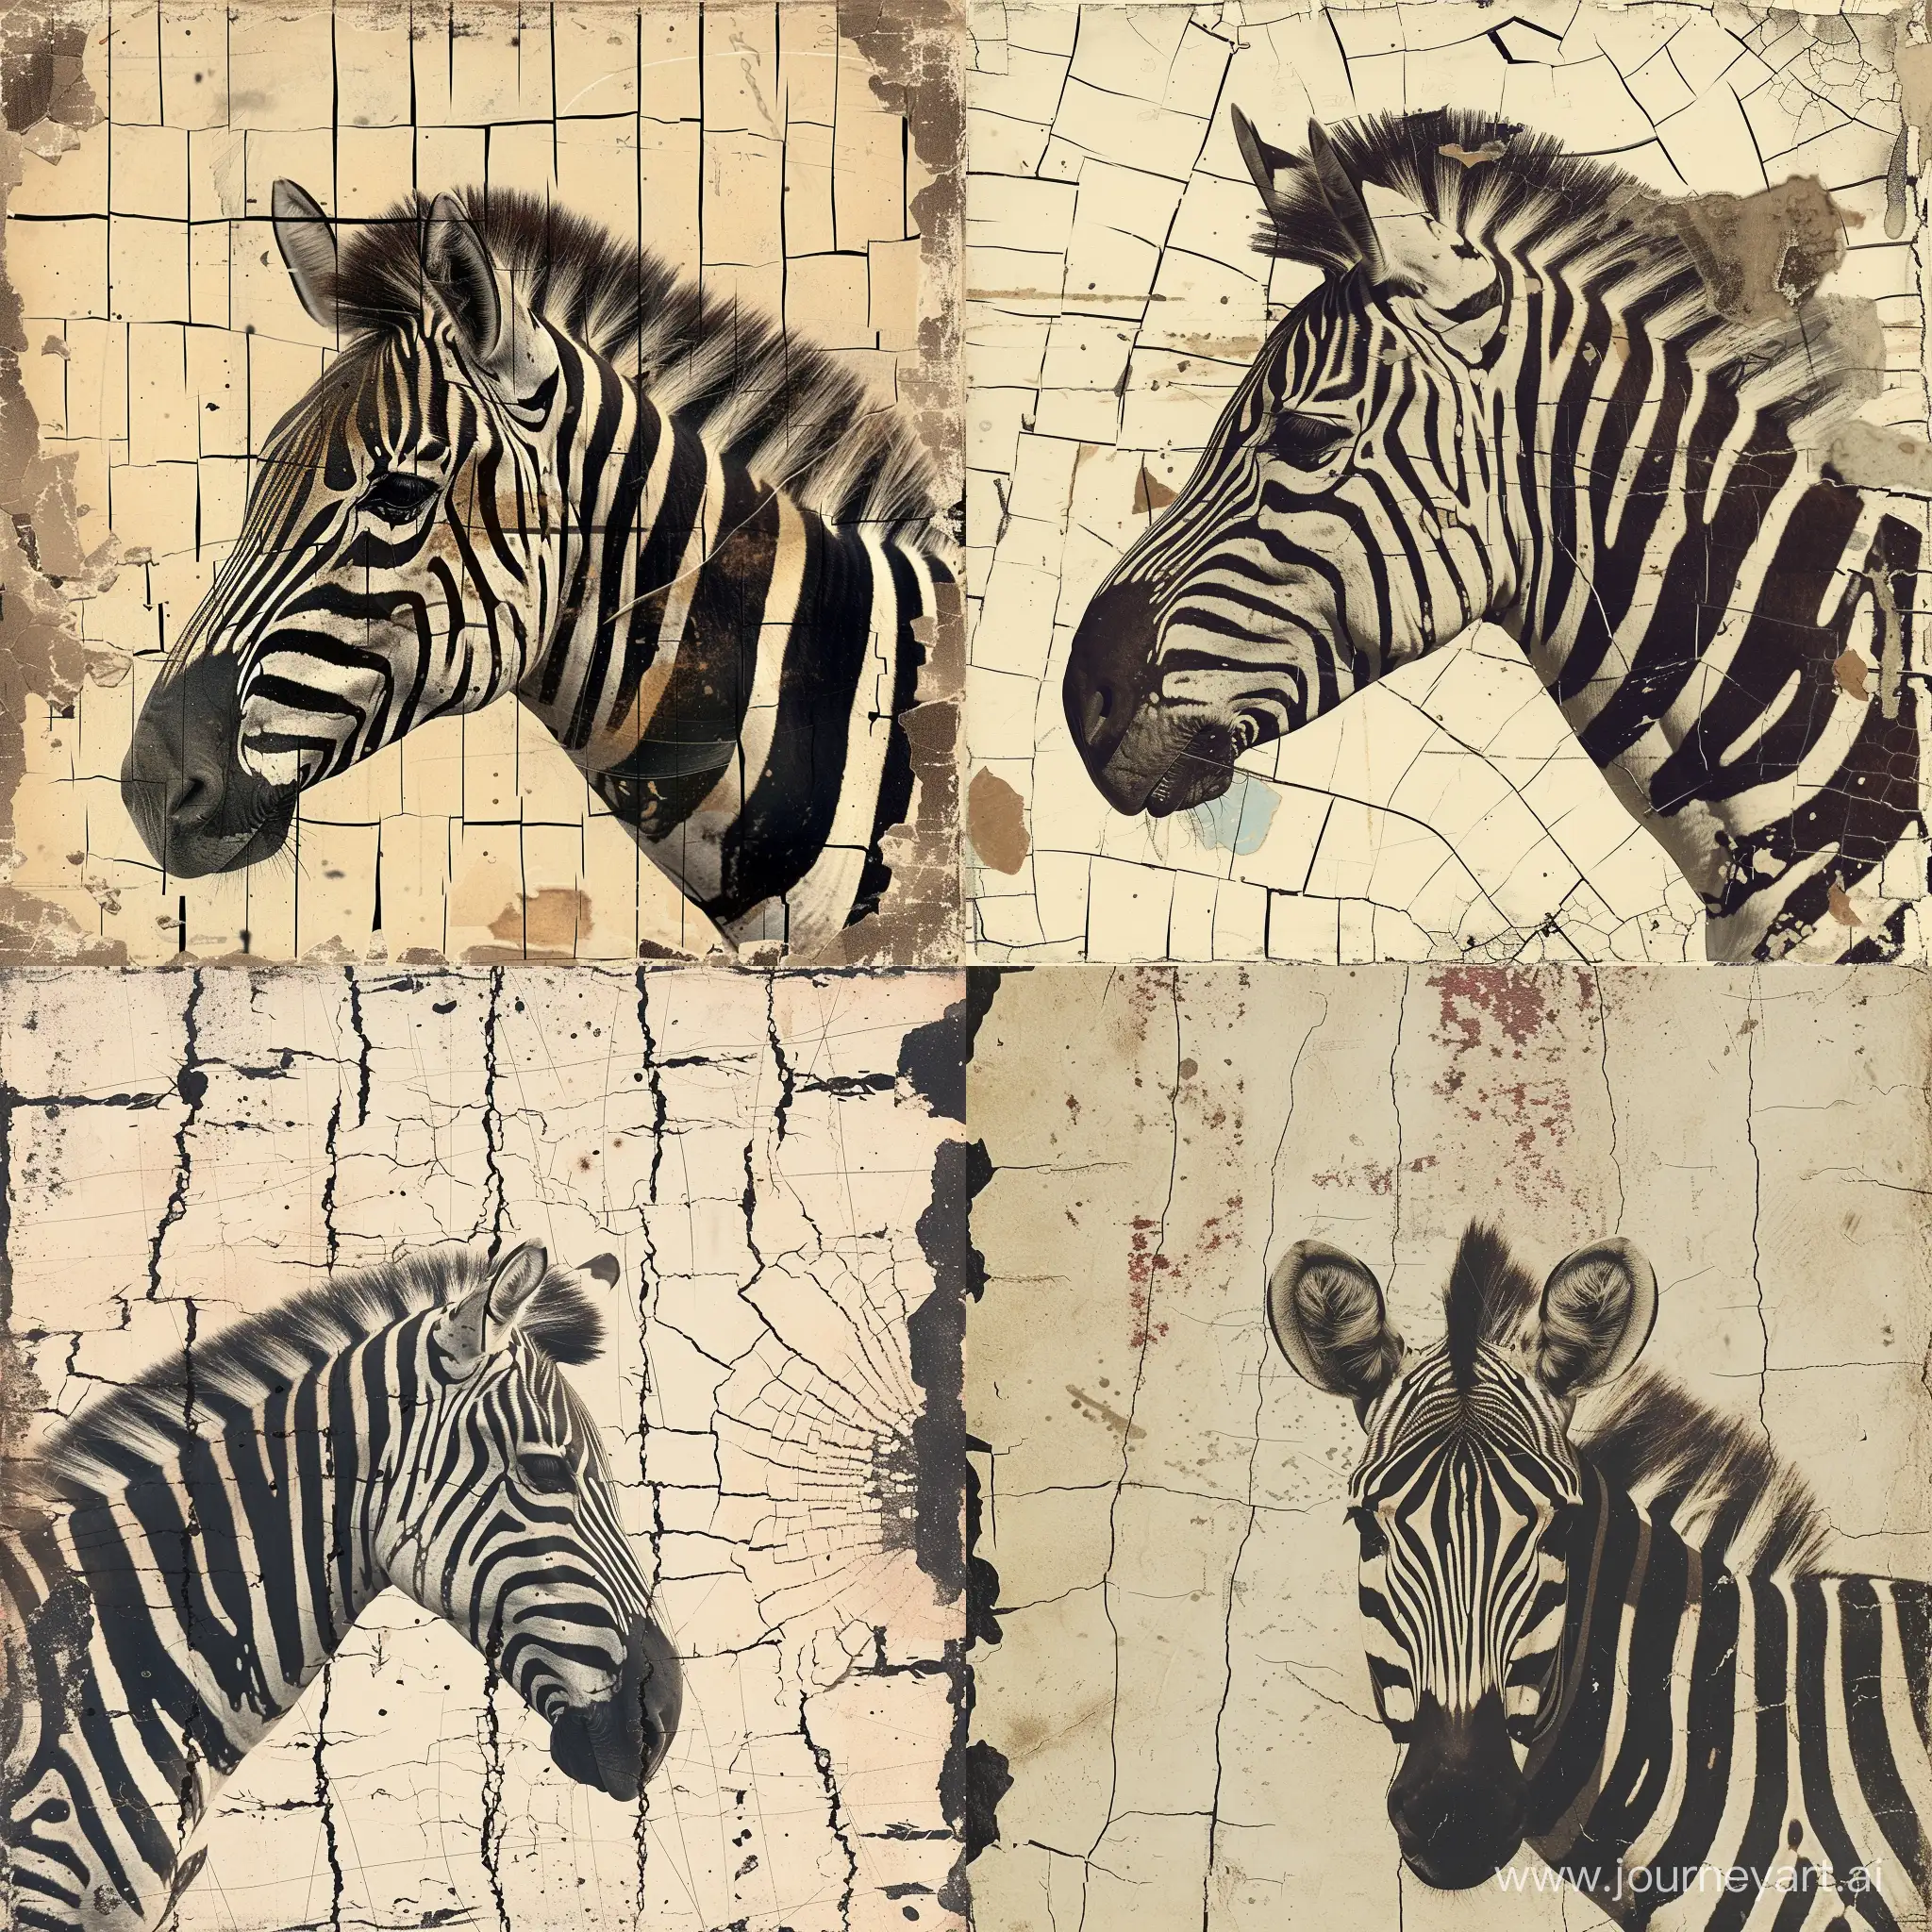 double exposure complex art, zebra on a surreal postcard on a cracked paper